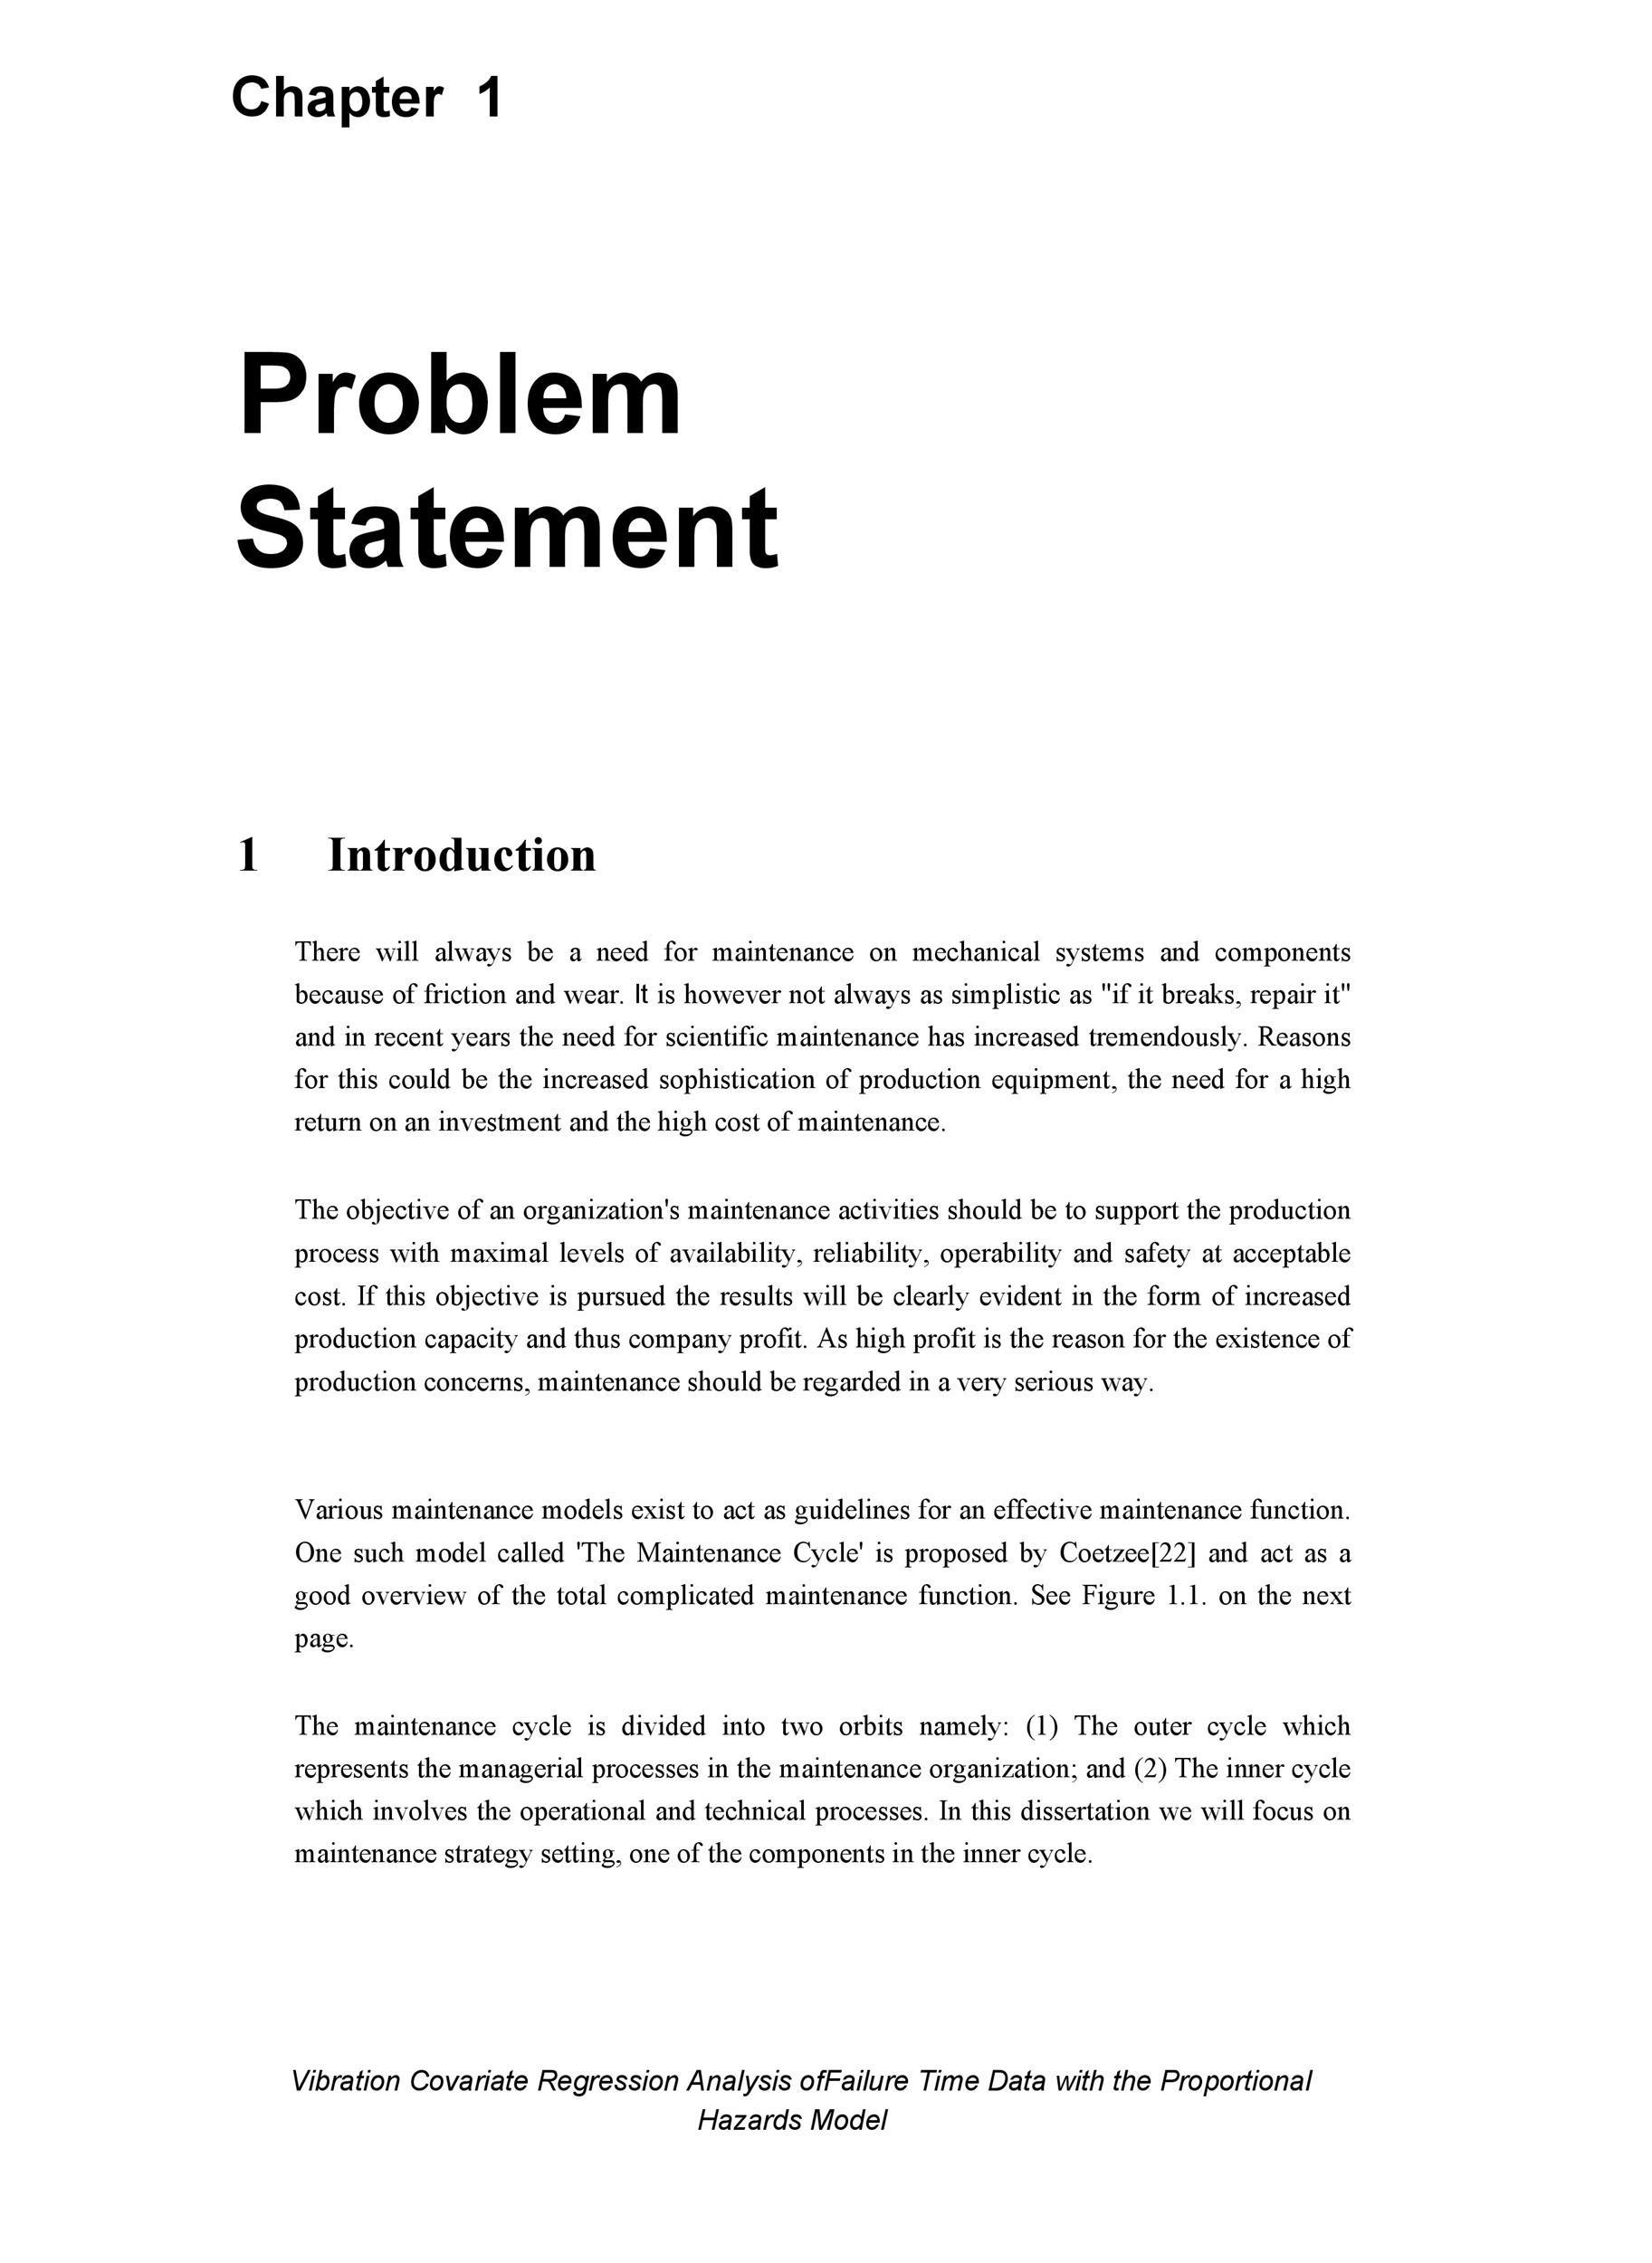 sample thesis with statement of the problem